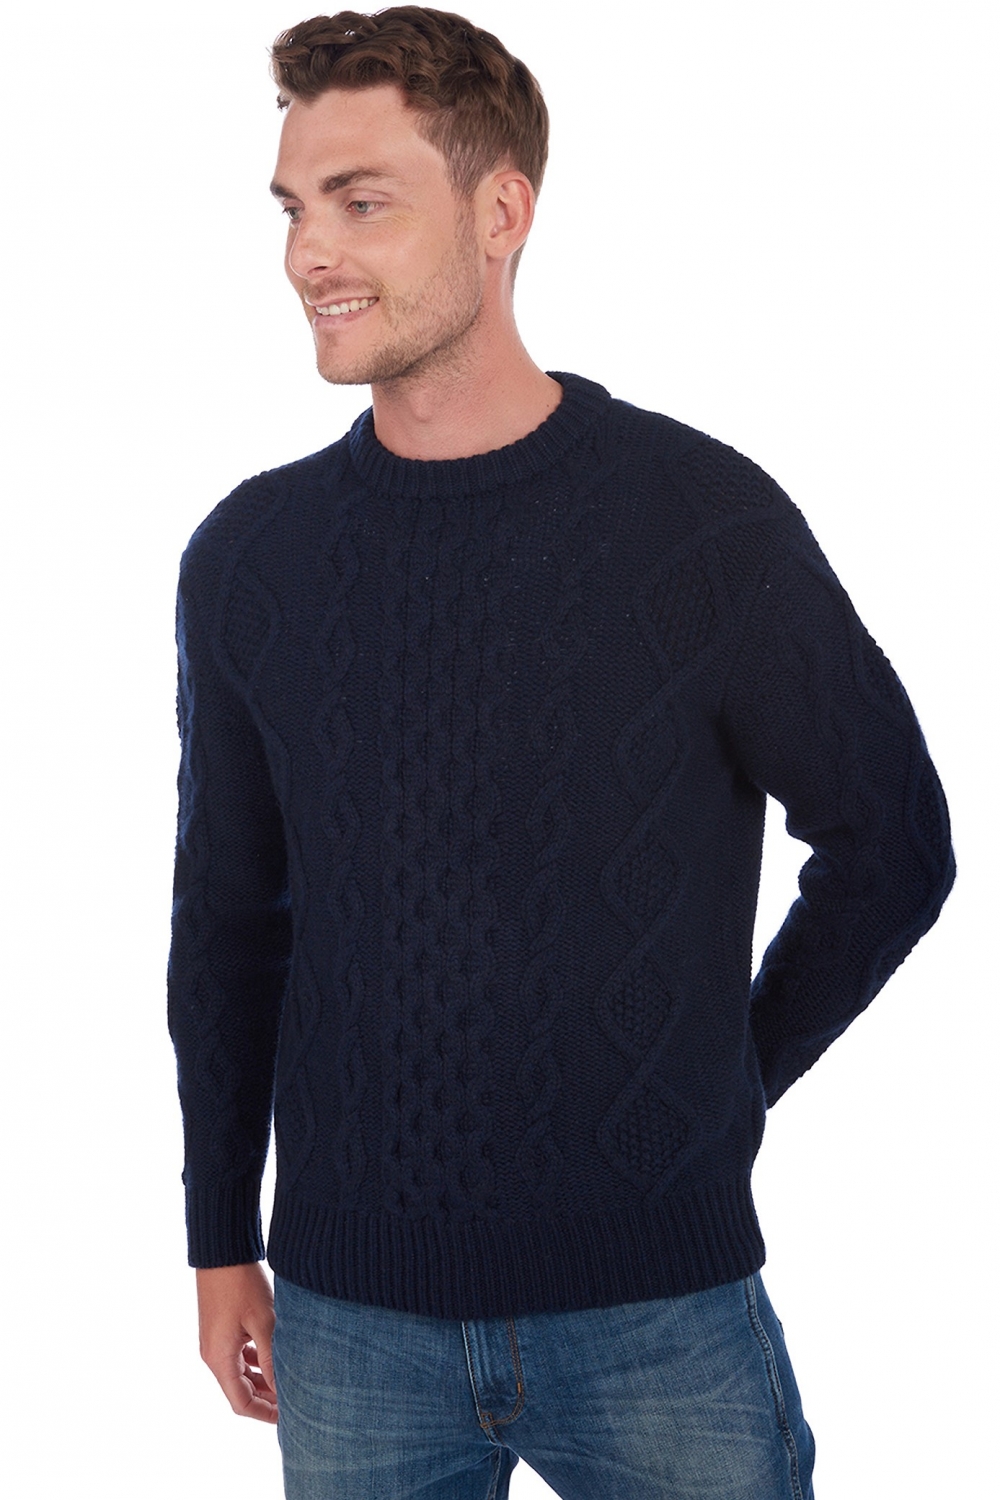 Cachemire pull homme col rond acharnes marine fonce m